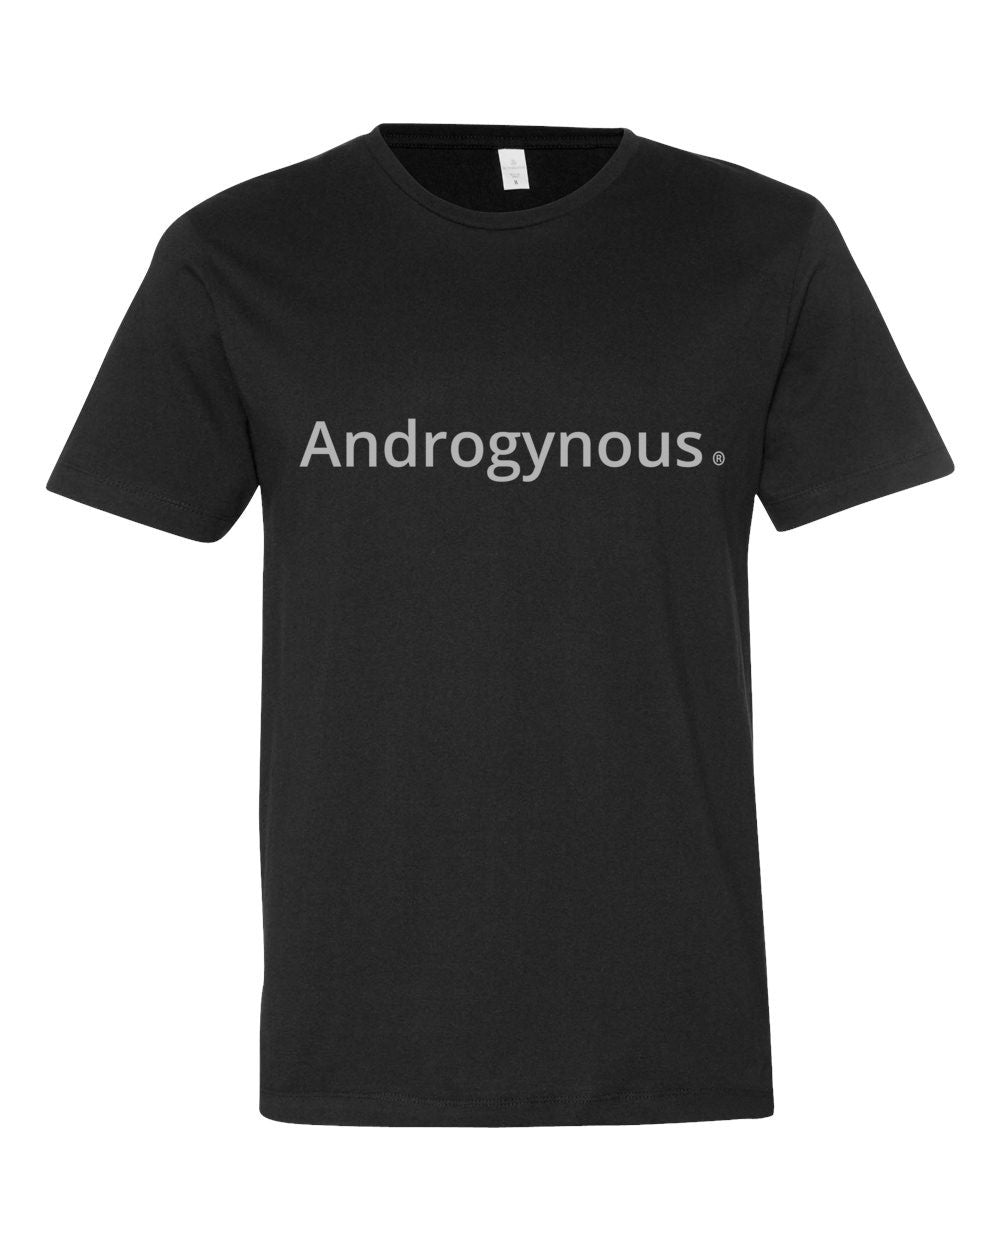 ANDROGYNOUS SILVER ON BLACK PRINTED FINE JERSEY COTTON-T-SHIRT